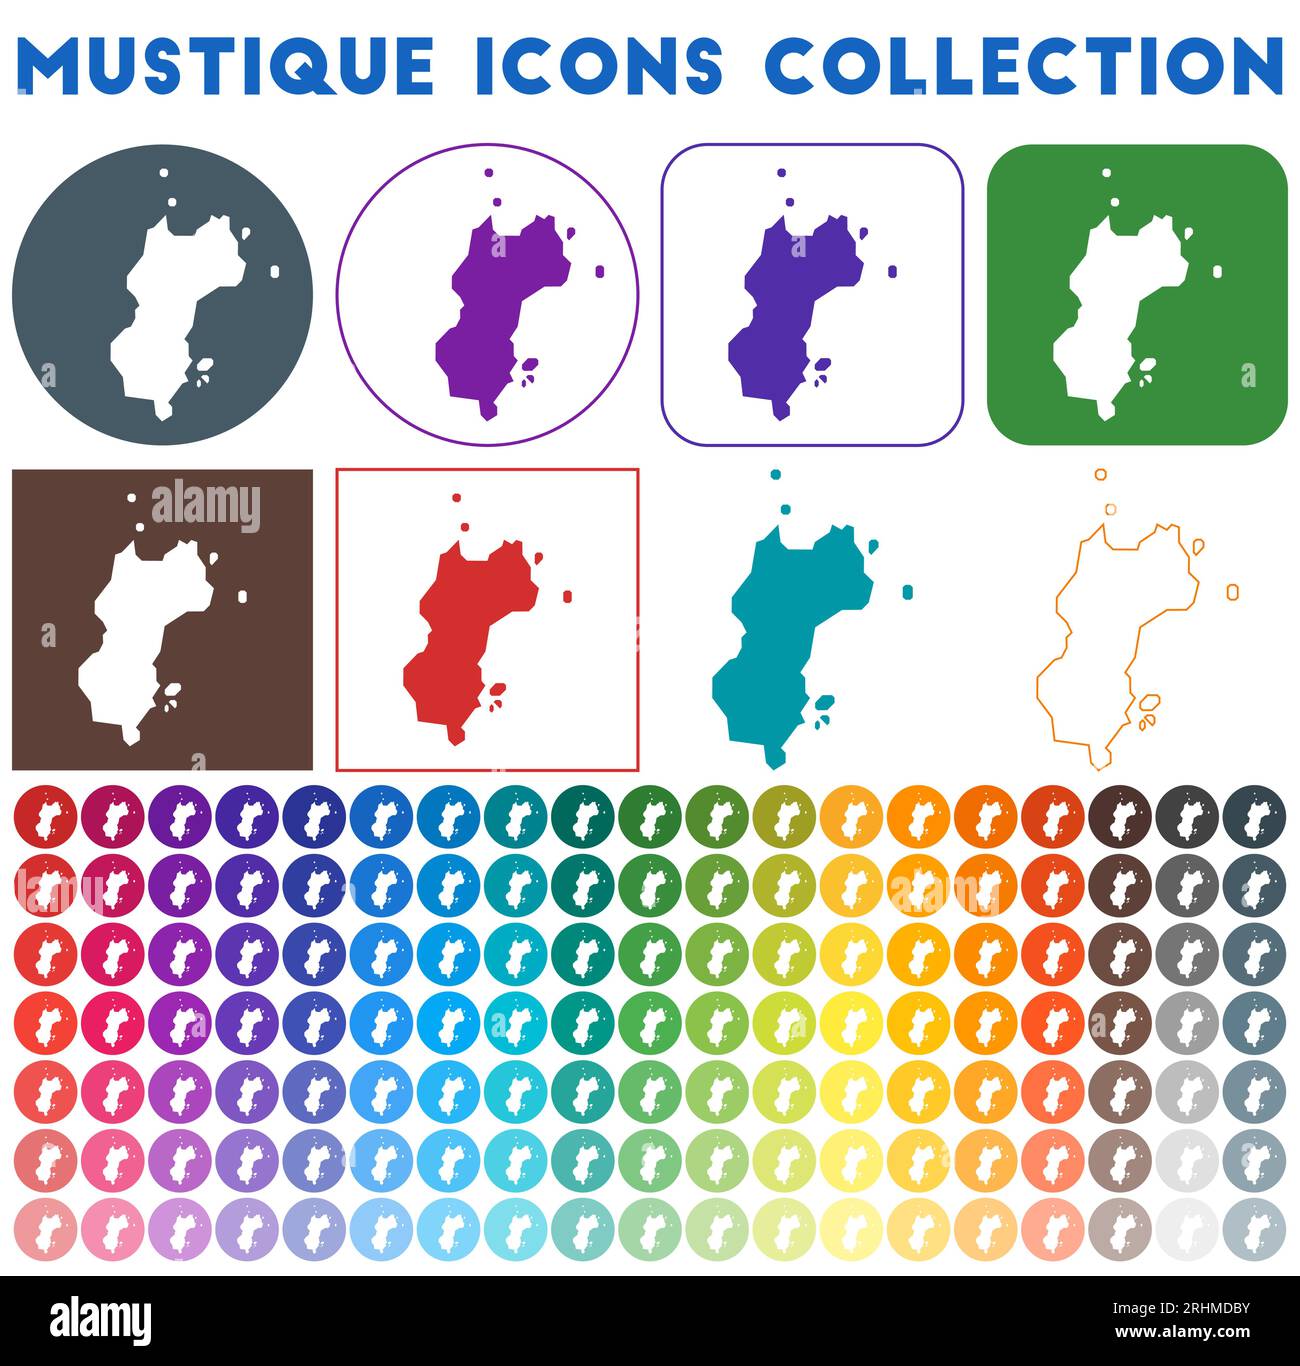 Mustique icons collection. Bright colourful trendy map icons. Modern ...